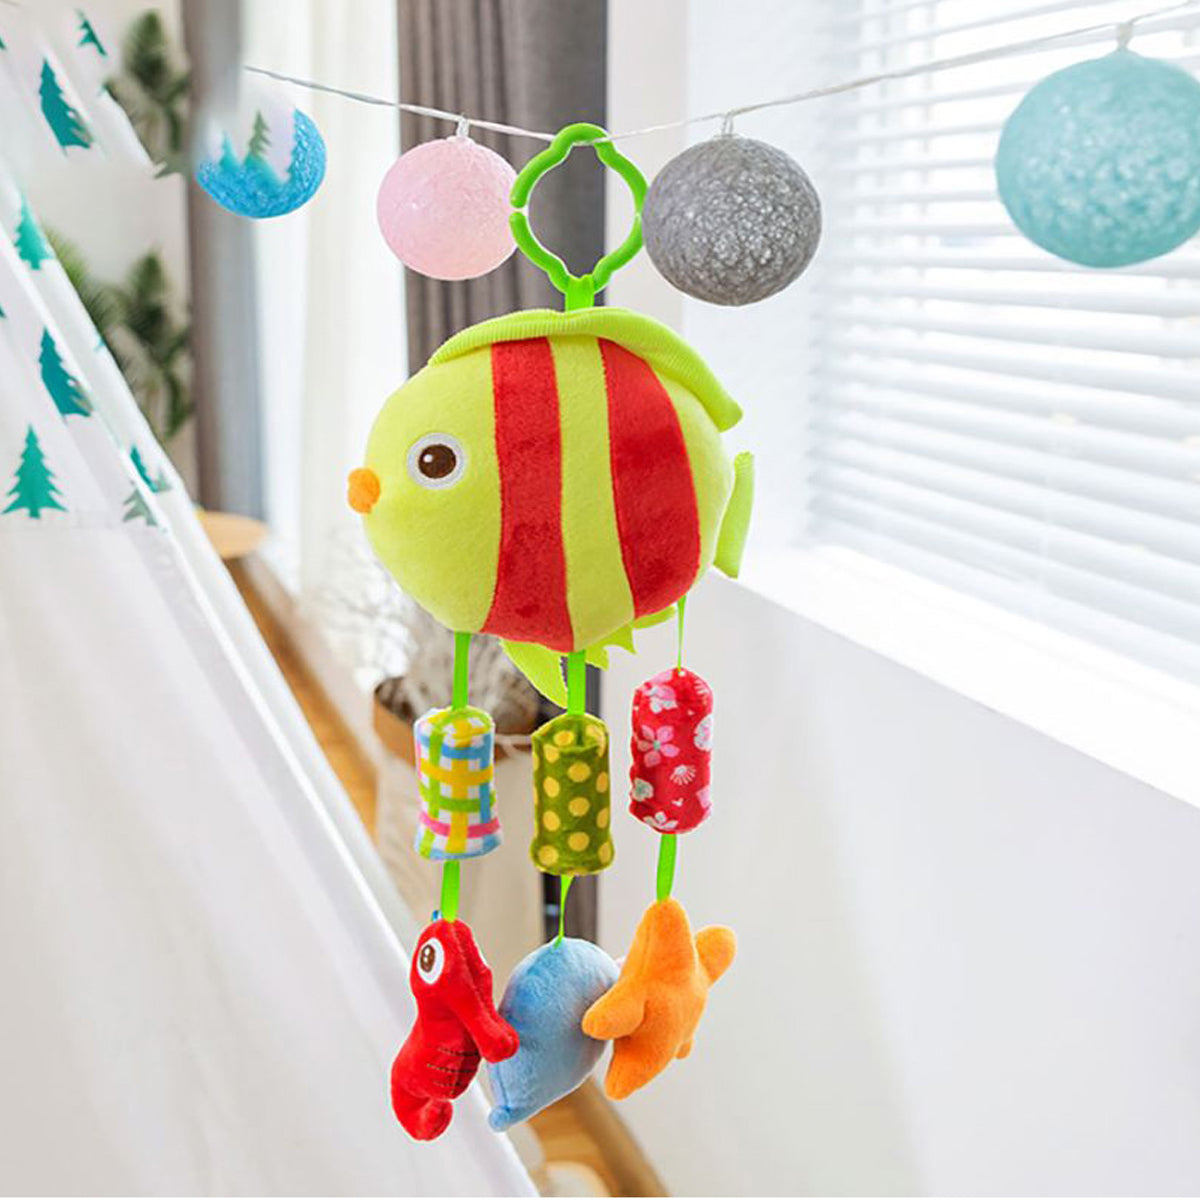 Hanging Rattle Toy